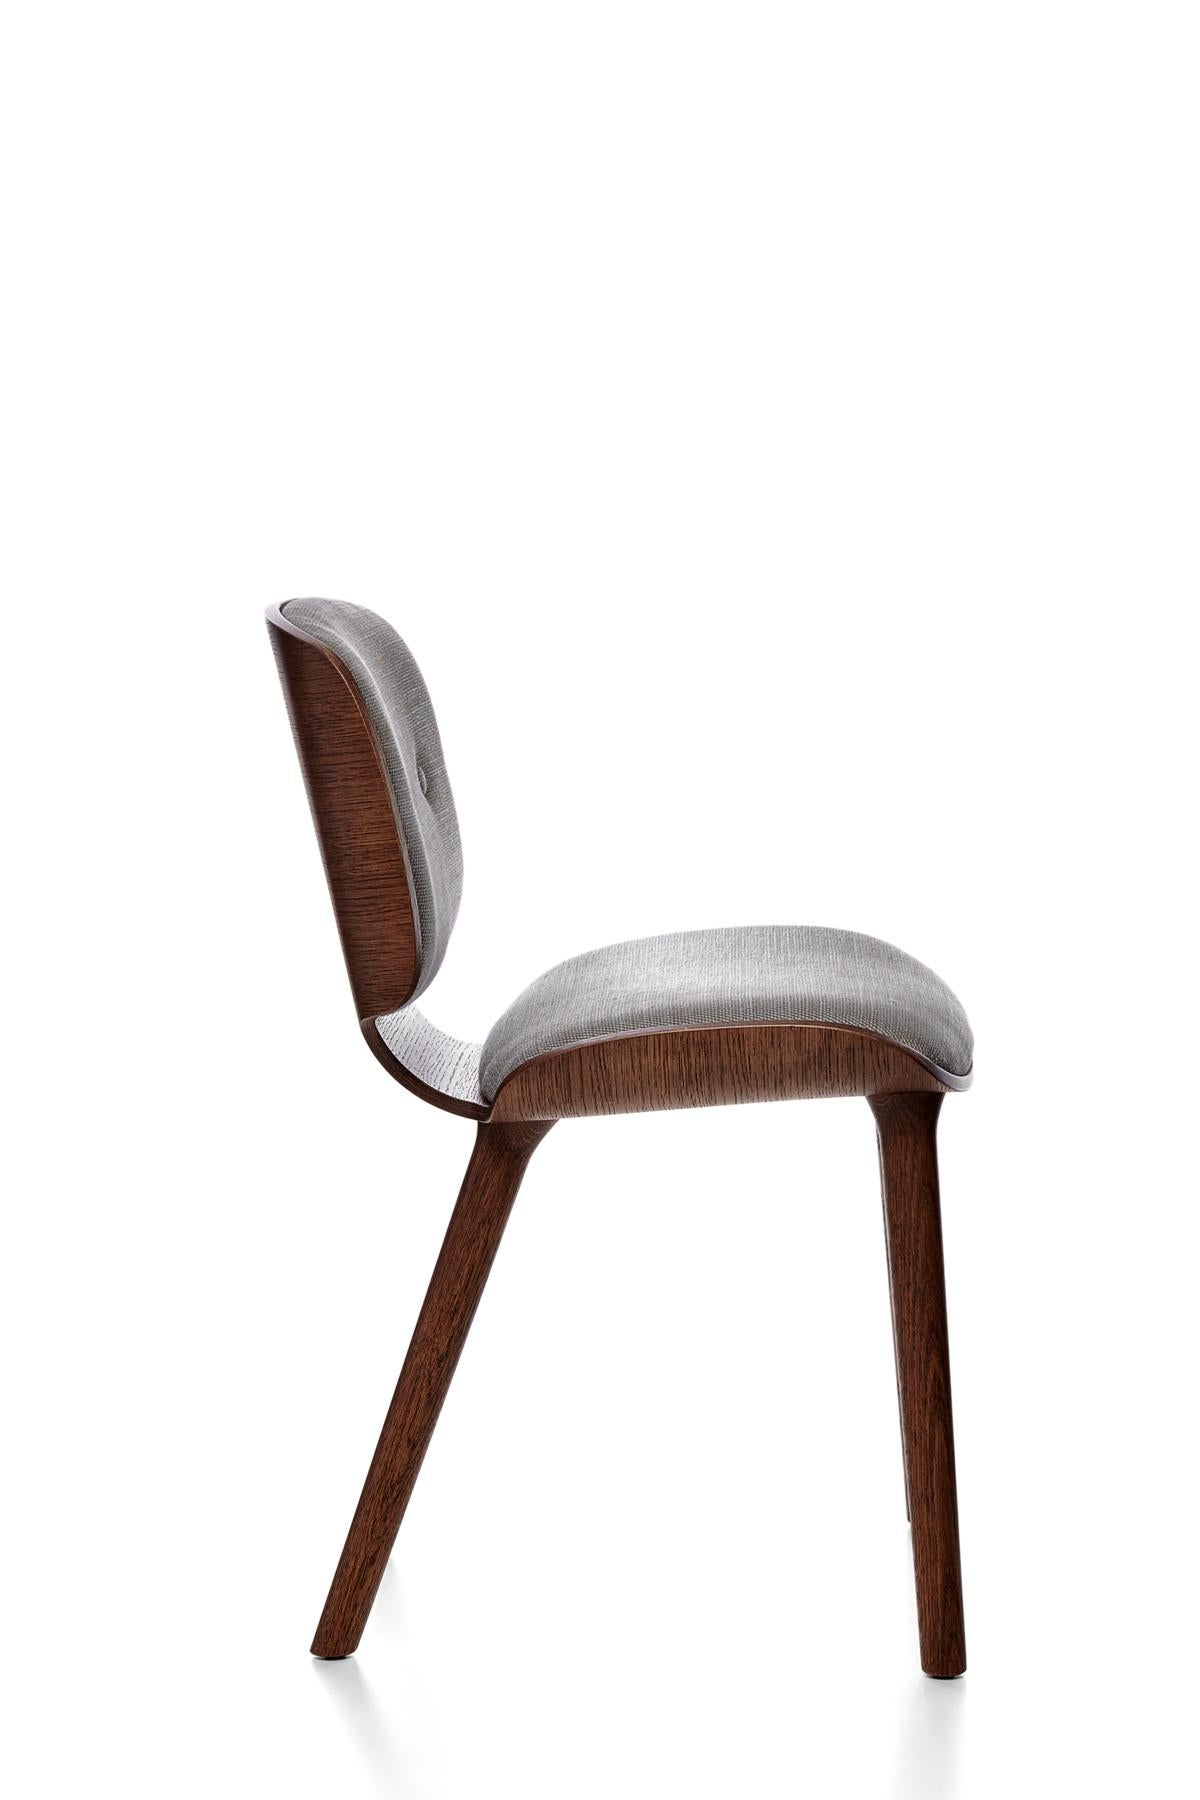 Modern Moooi Nut Dining Chair in Cinnamon Stained Oak & Oray Ronan, Mineral Upholstery For Sale